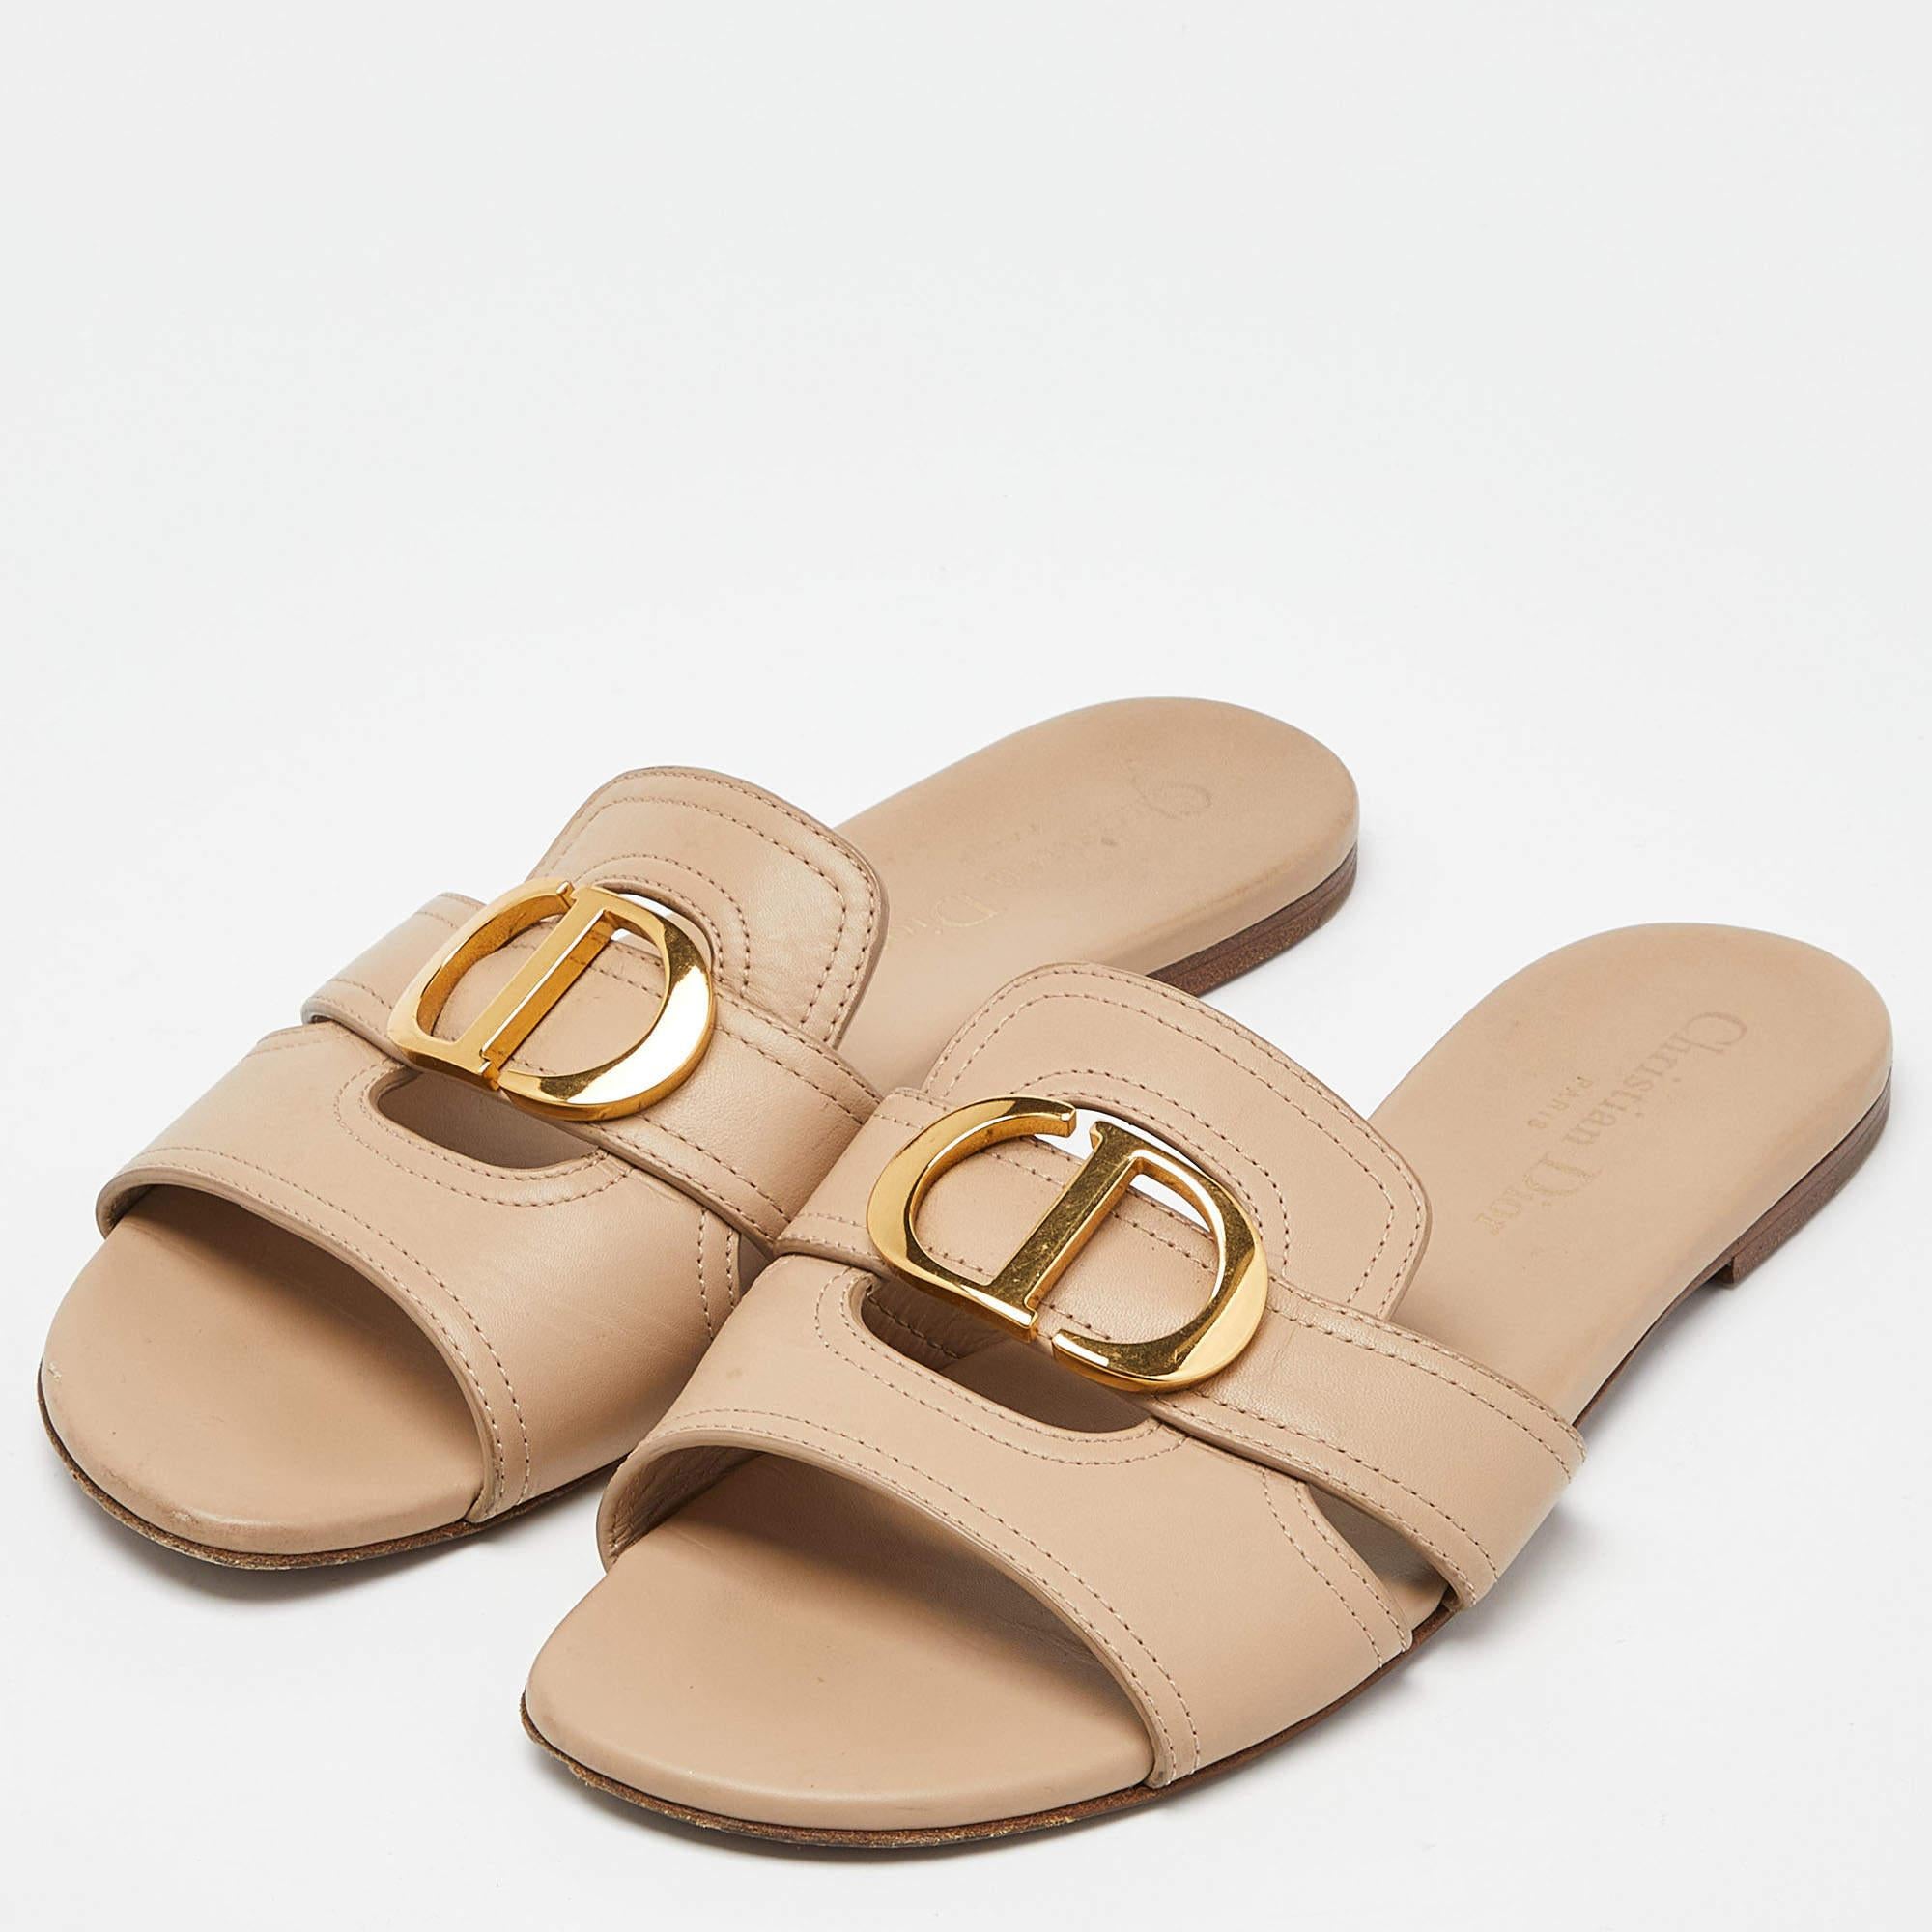 Dior's 30 Montaigne sandal is a wardrobe essential. Crafted from leather, the slides feature a CD logo in gold-tone metal, open toes, and durable soles. The 30 Montaigne can be paired with a variety of looks.

